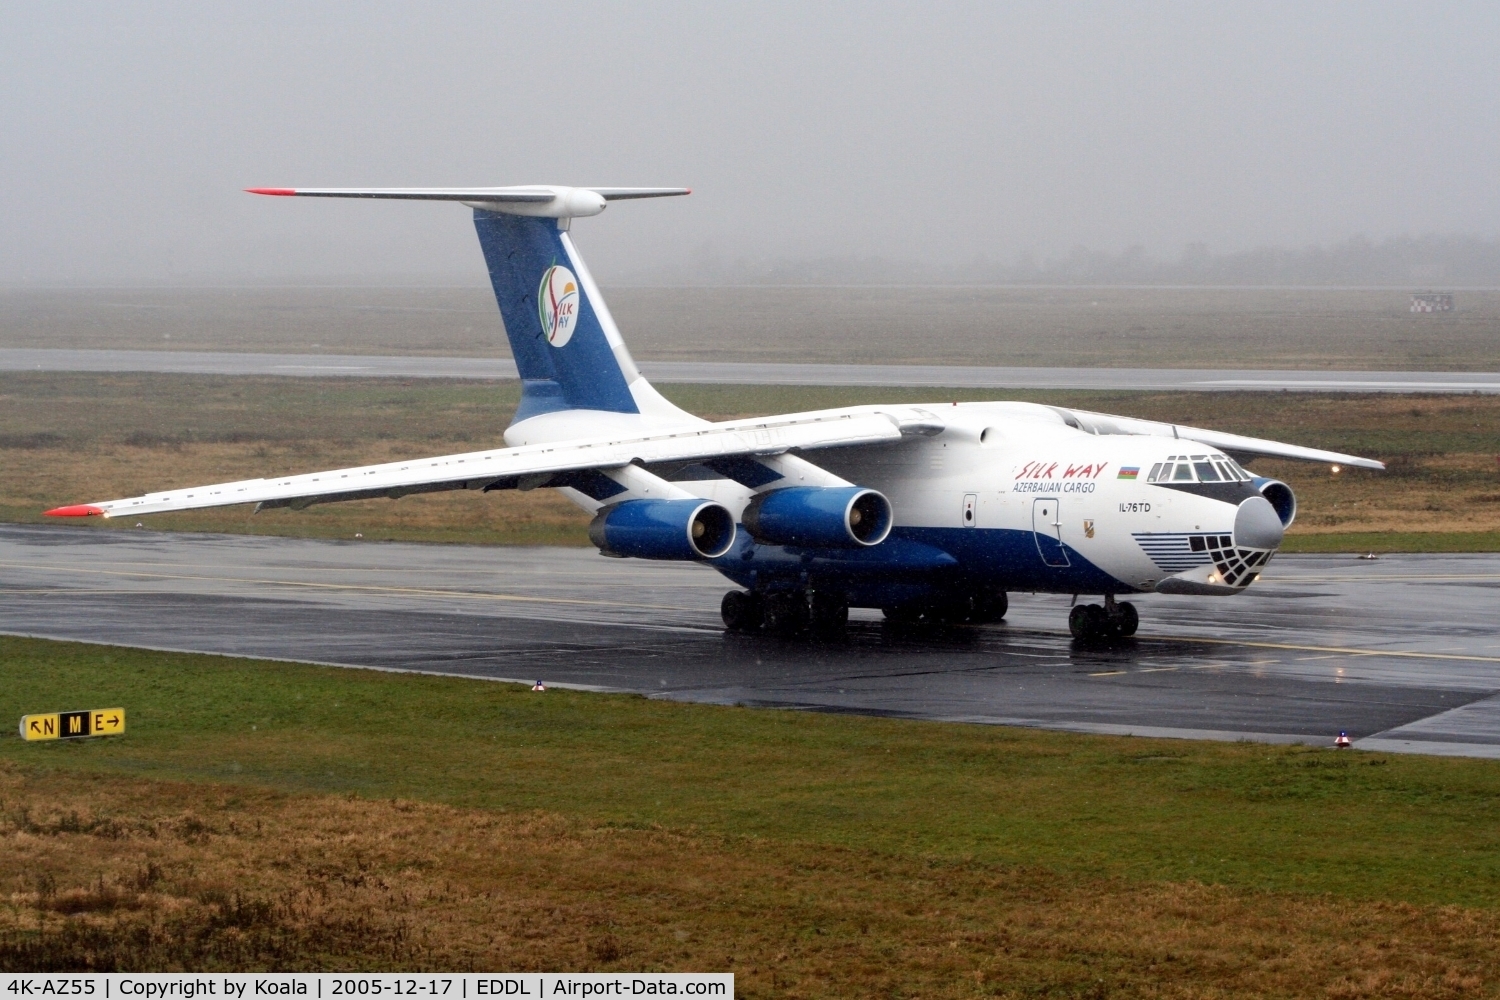 4K-AZ55, 1994 Ilyushin IL-76TD C/N 2053420680, Charity flight to East Europe with Christmas packages for children.